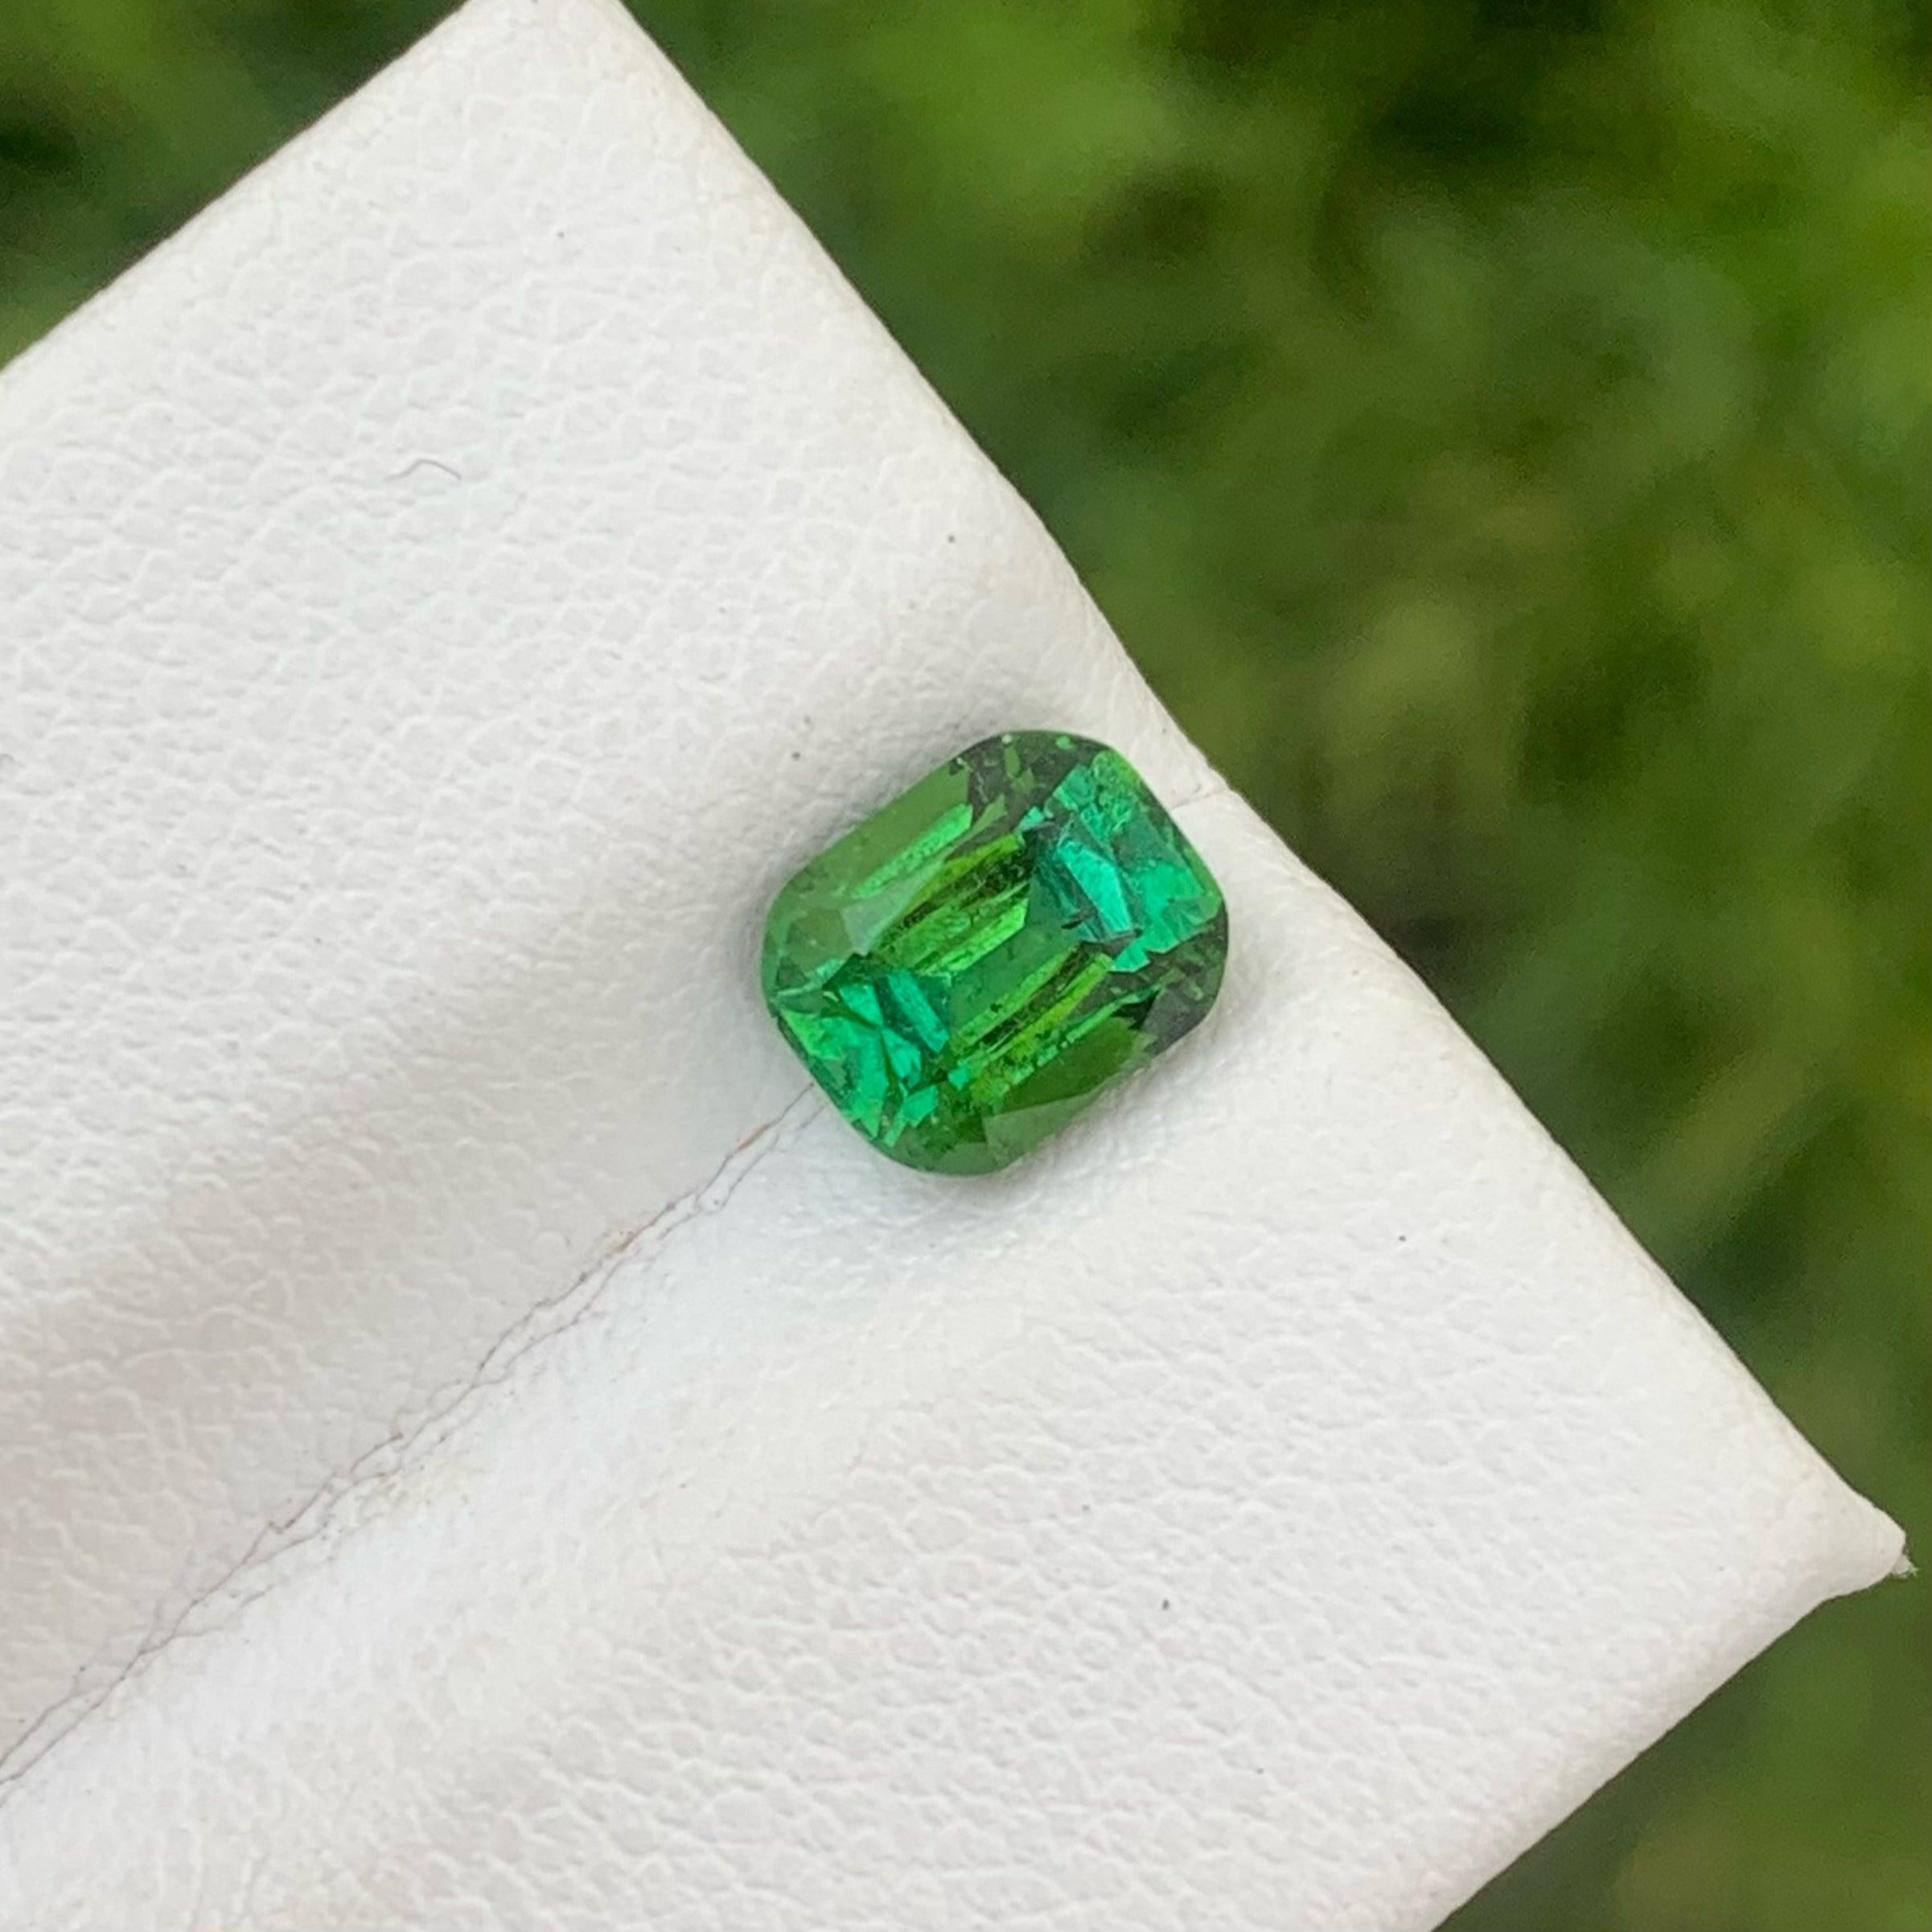 Adorable Natural Green Tourmaline Stone, Available For Sale At Wholesale Price Natural High Quality 1.55 Carats SI Clarity Untreated Tourmaline From Afghanistan.

Product Information:

GEMSTONE TYPE: Adorable Natural Green Tourmaline Stone
WEIGHT: